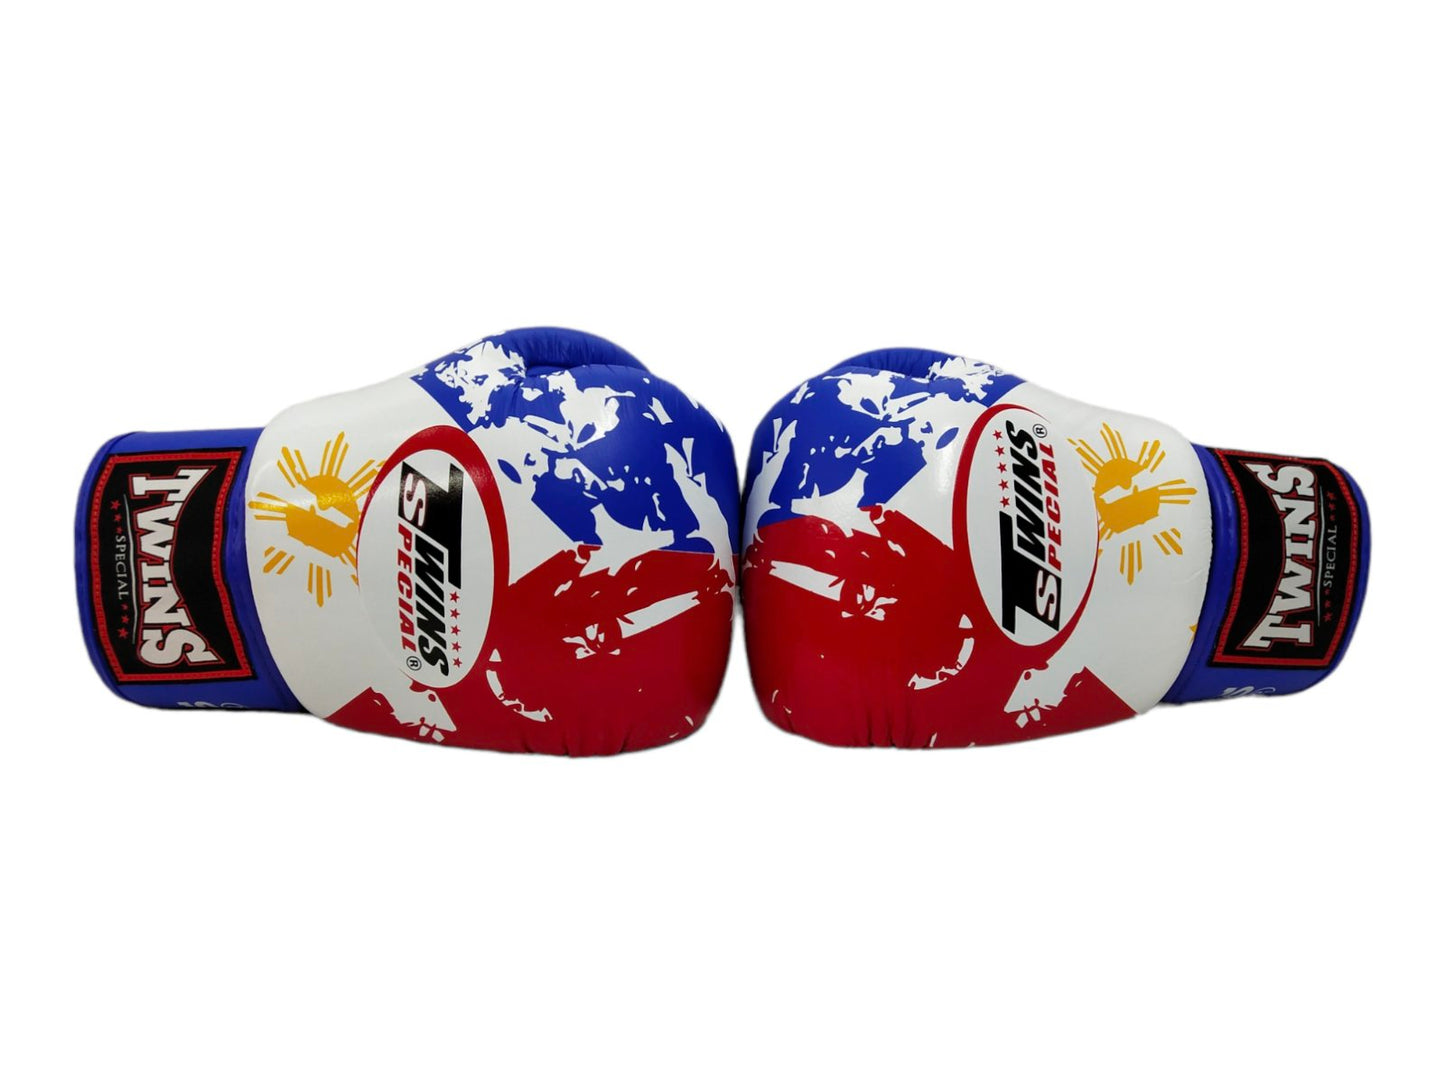 Twins Special Philippines Inspired Boxing Gloves